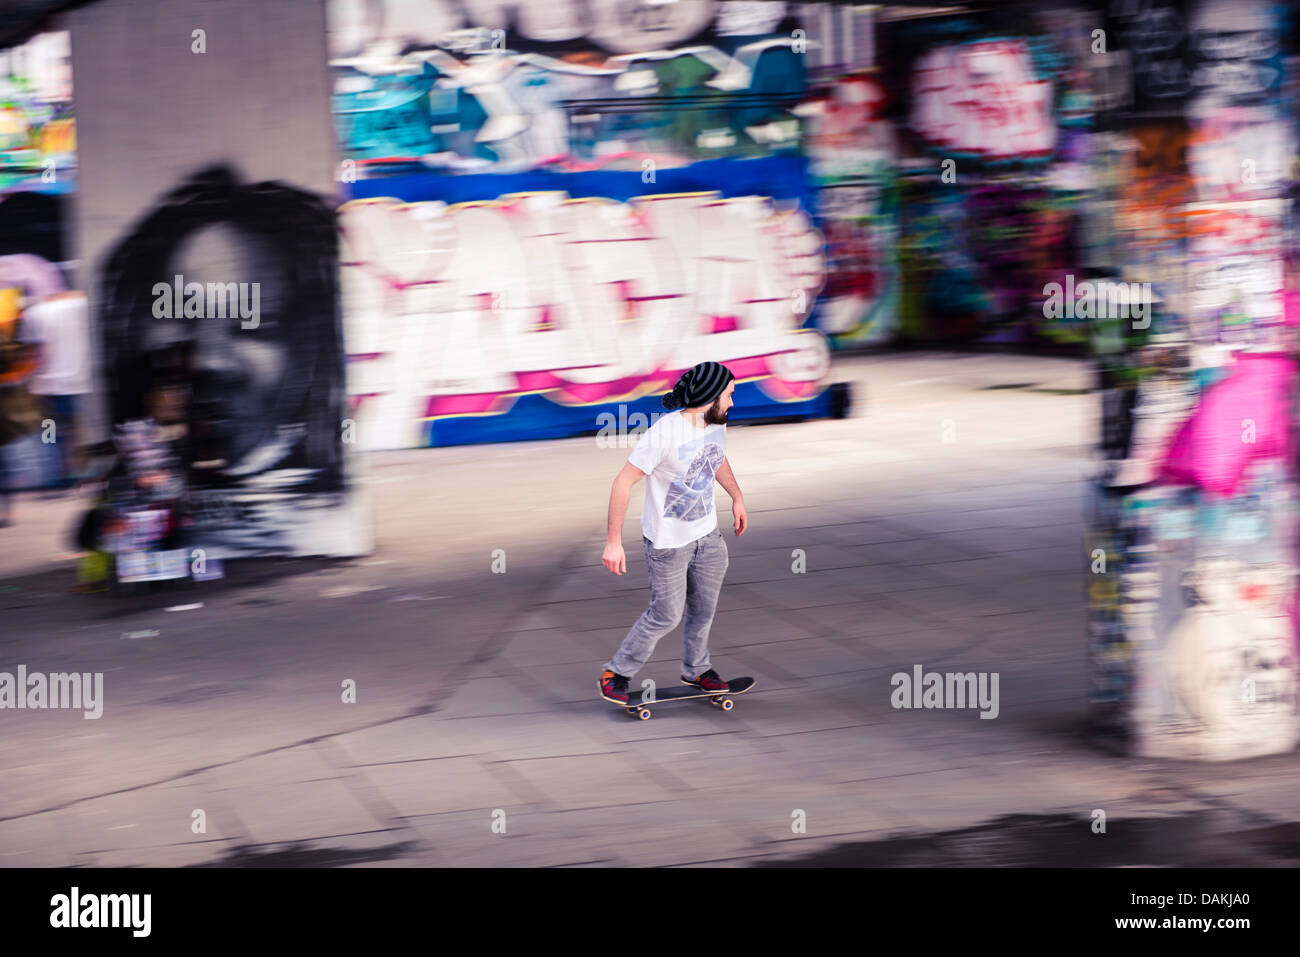 A young skateboarder in Undercroft, Southbank, London Stock Photo